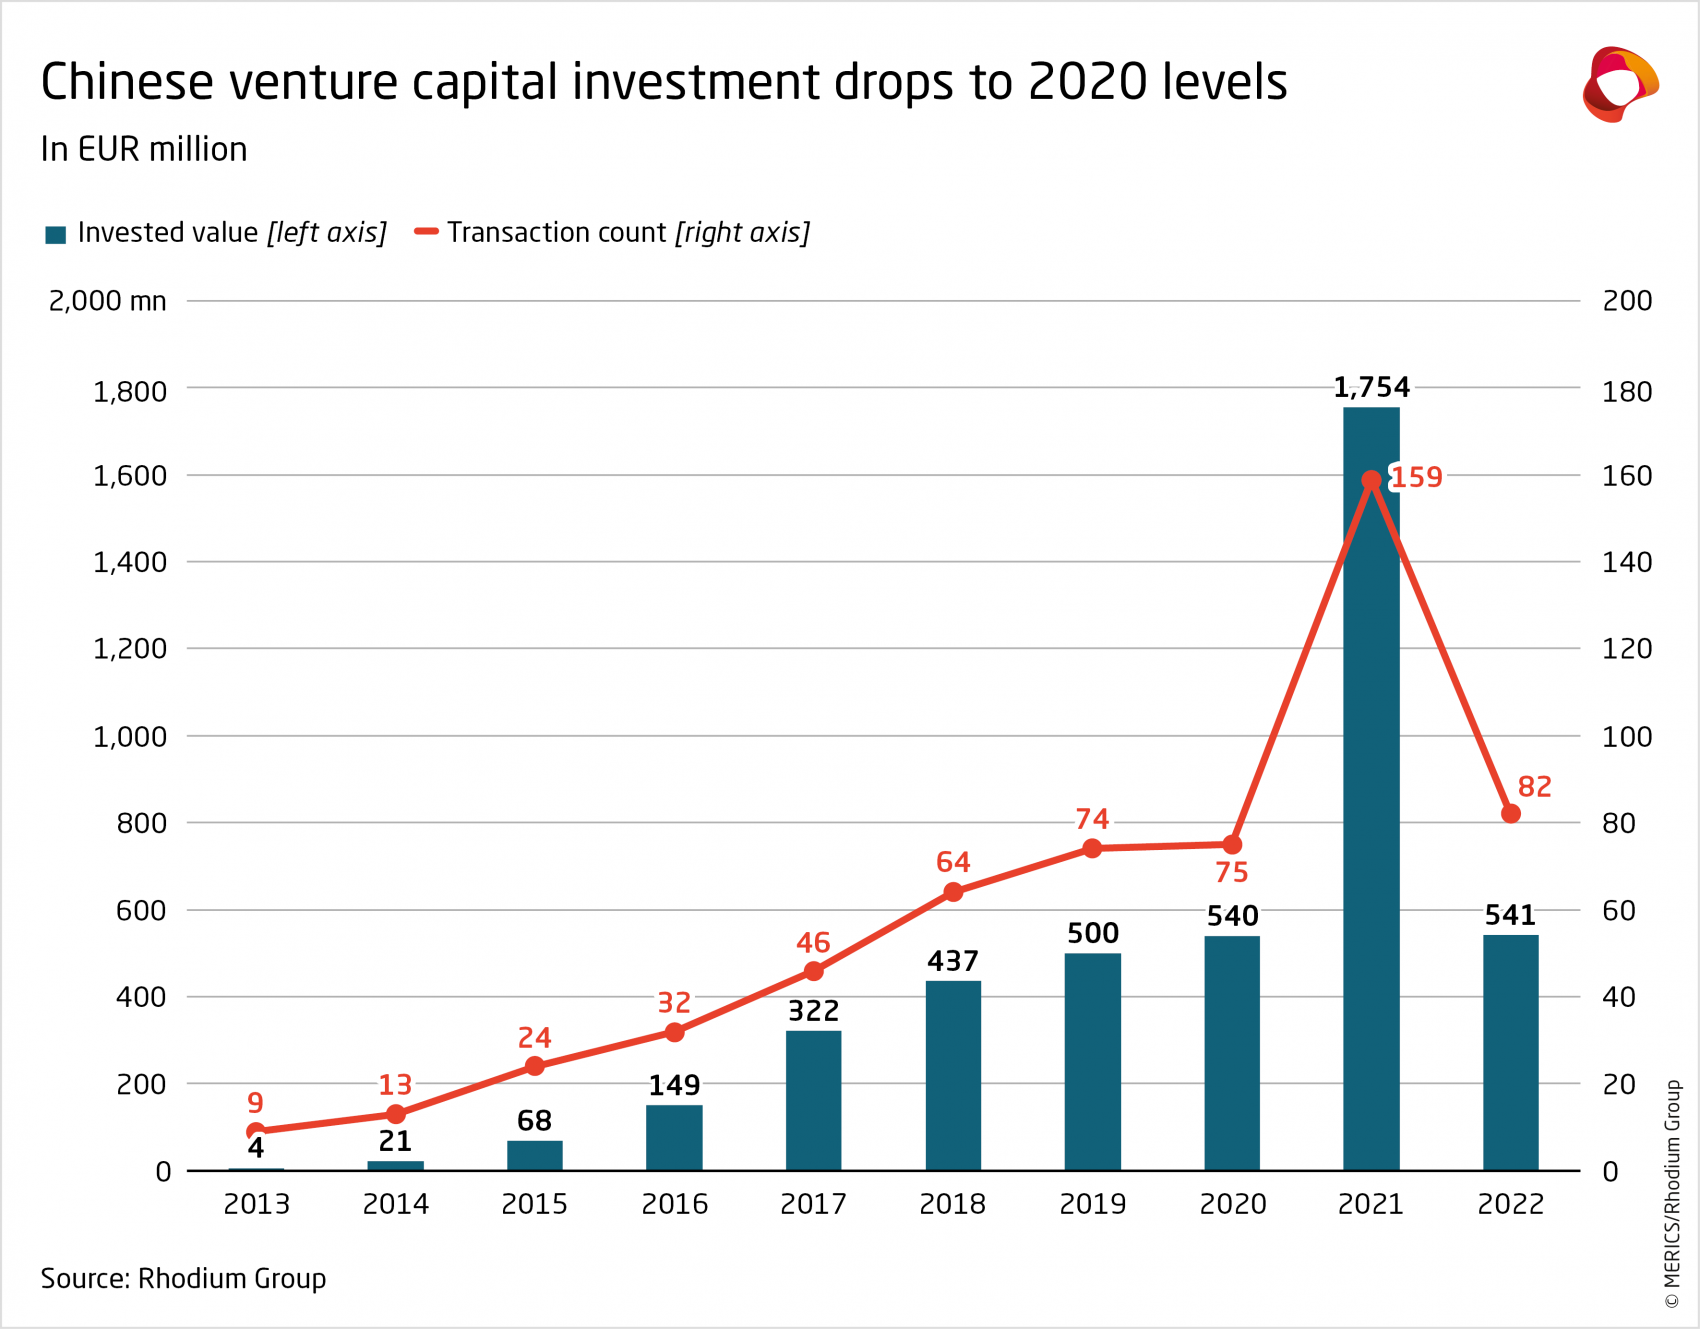 merics-chinese-fdi-in-europe-2022-venture-capital-investment-drops.png